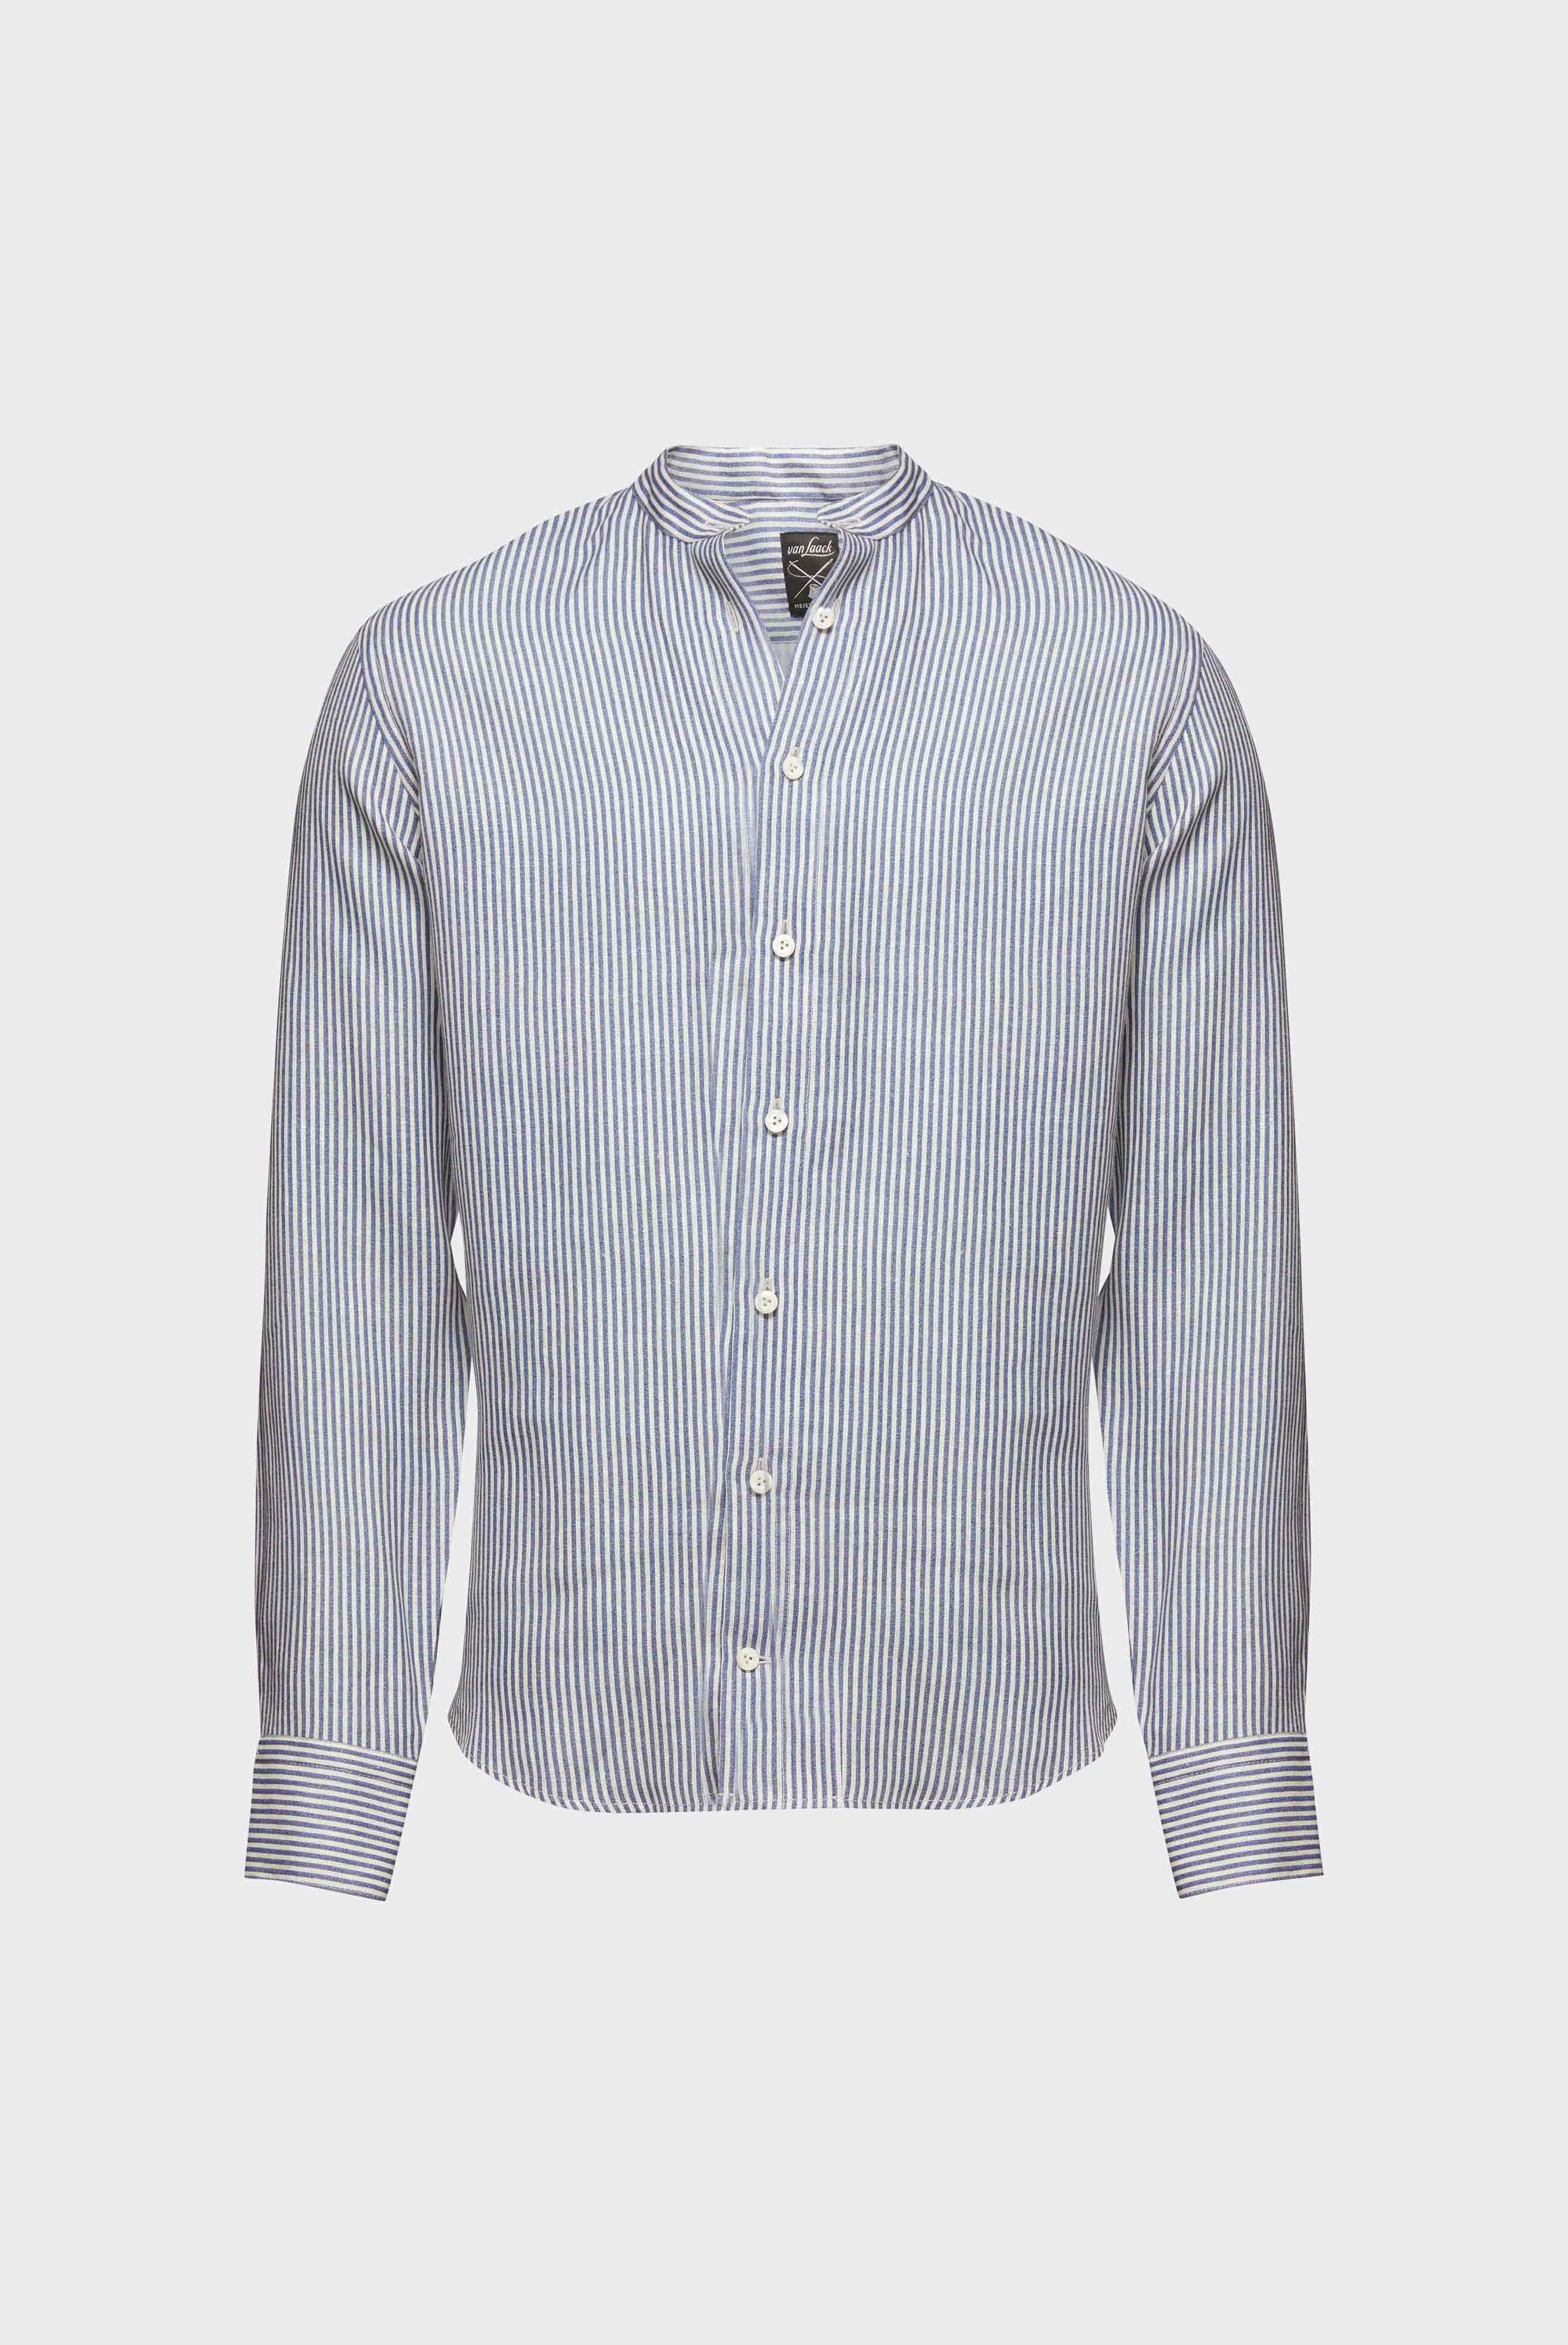 Casual Shirts+Linen Shirt with Stripe Print Tailor Fit+20.2041.9V.170355.761.38